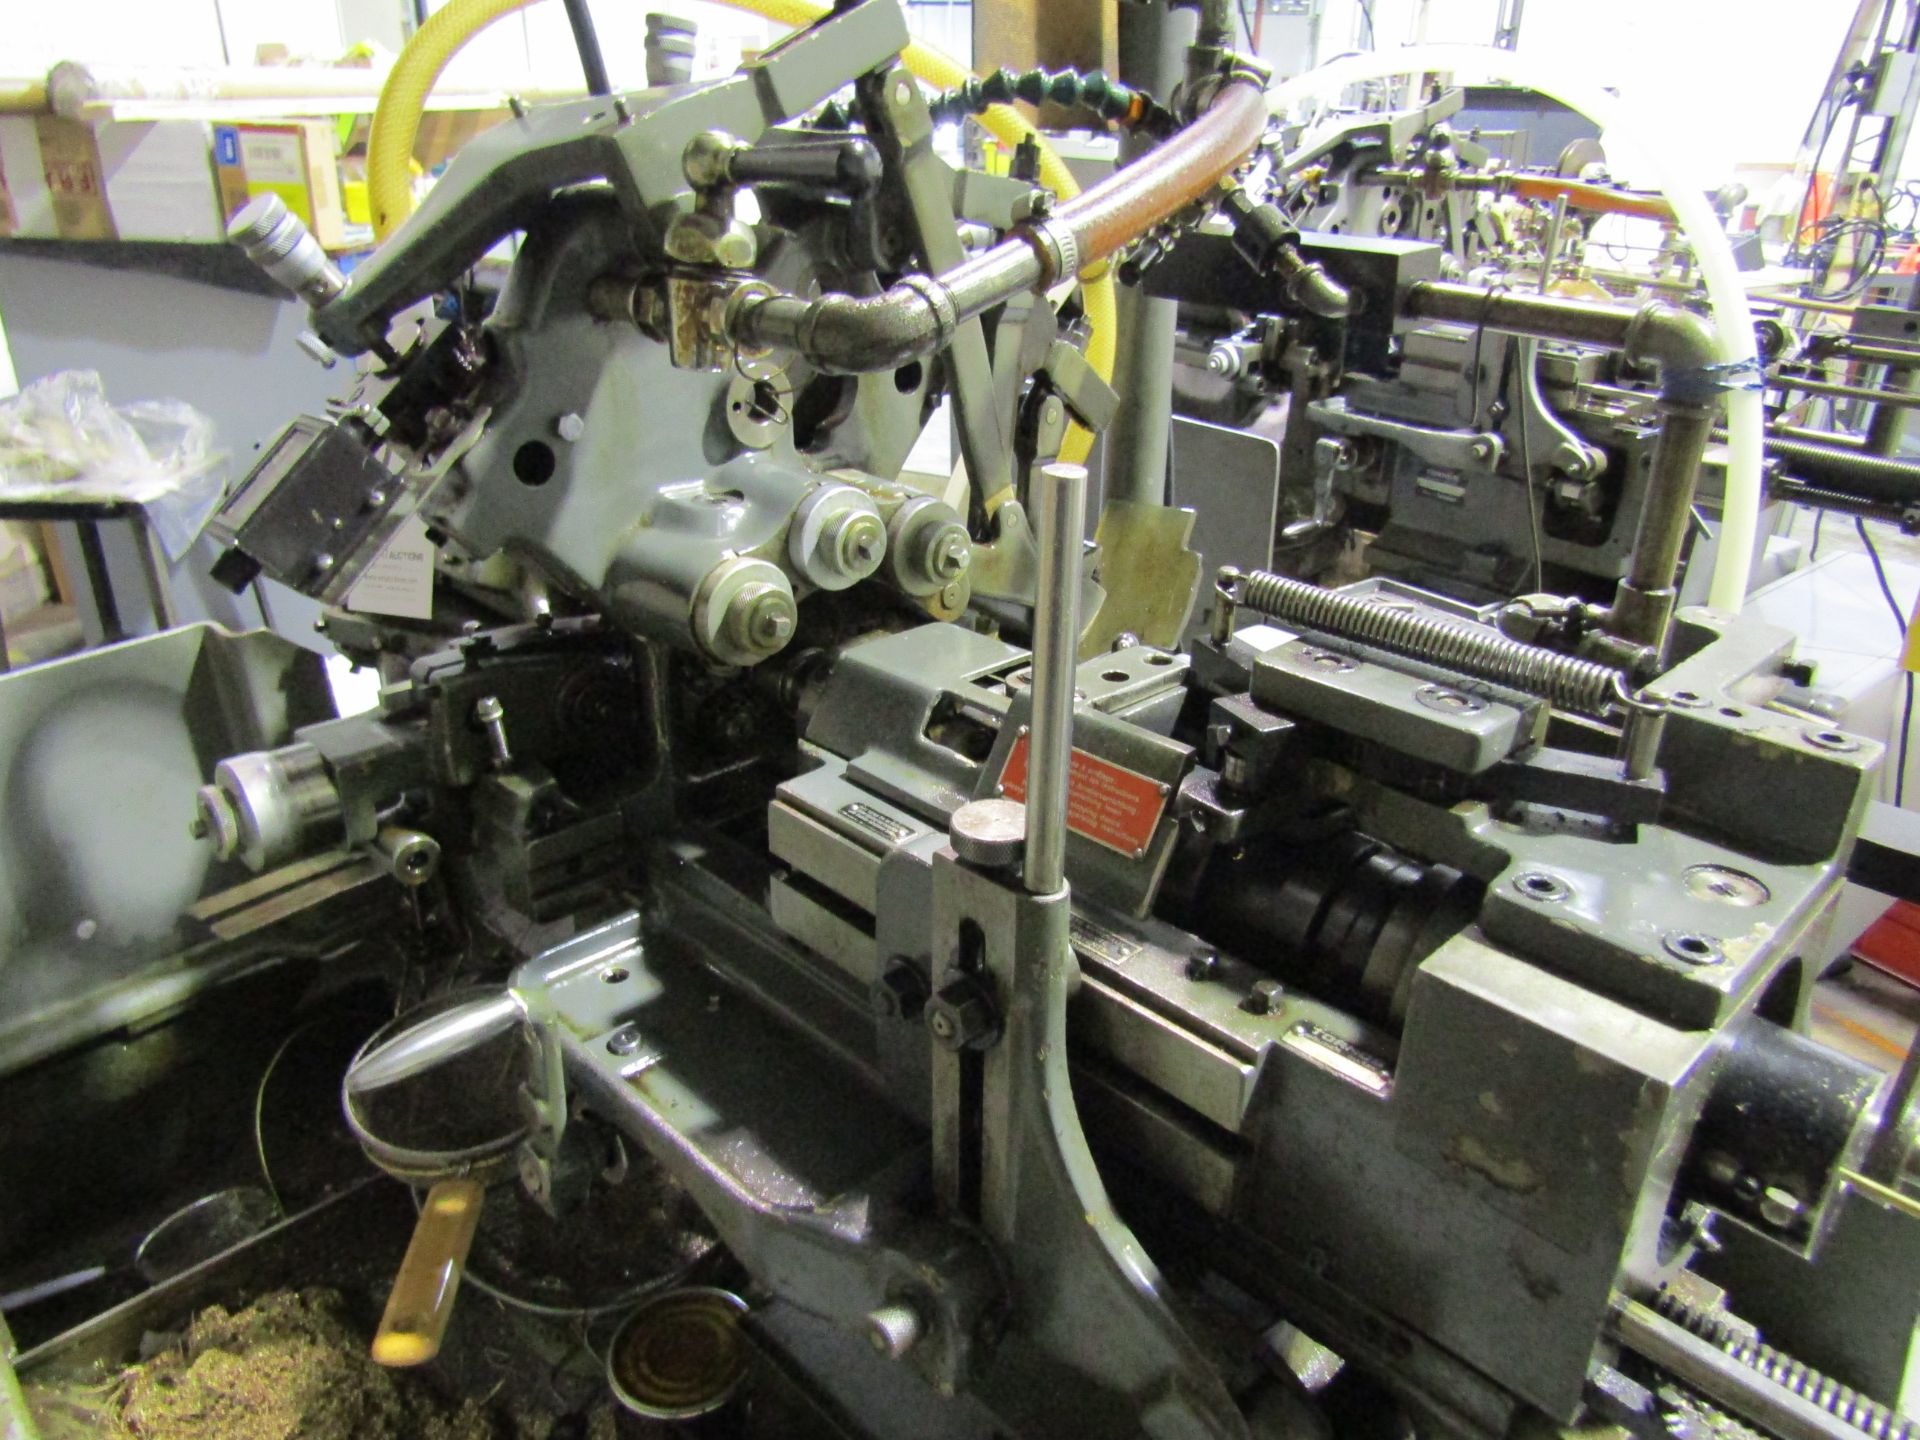 TORNOS AUTOMATIC SWISS LATHE, MODEL MS-7, SERIAL MS 50150 - Image 8 of 10